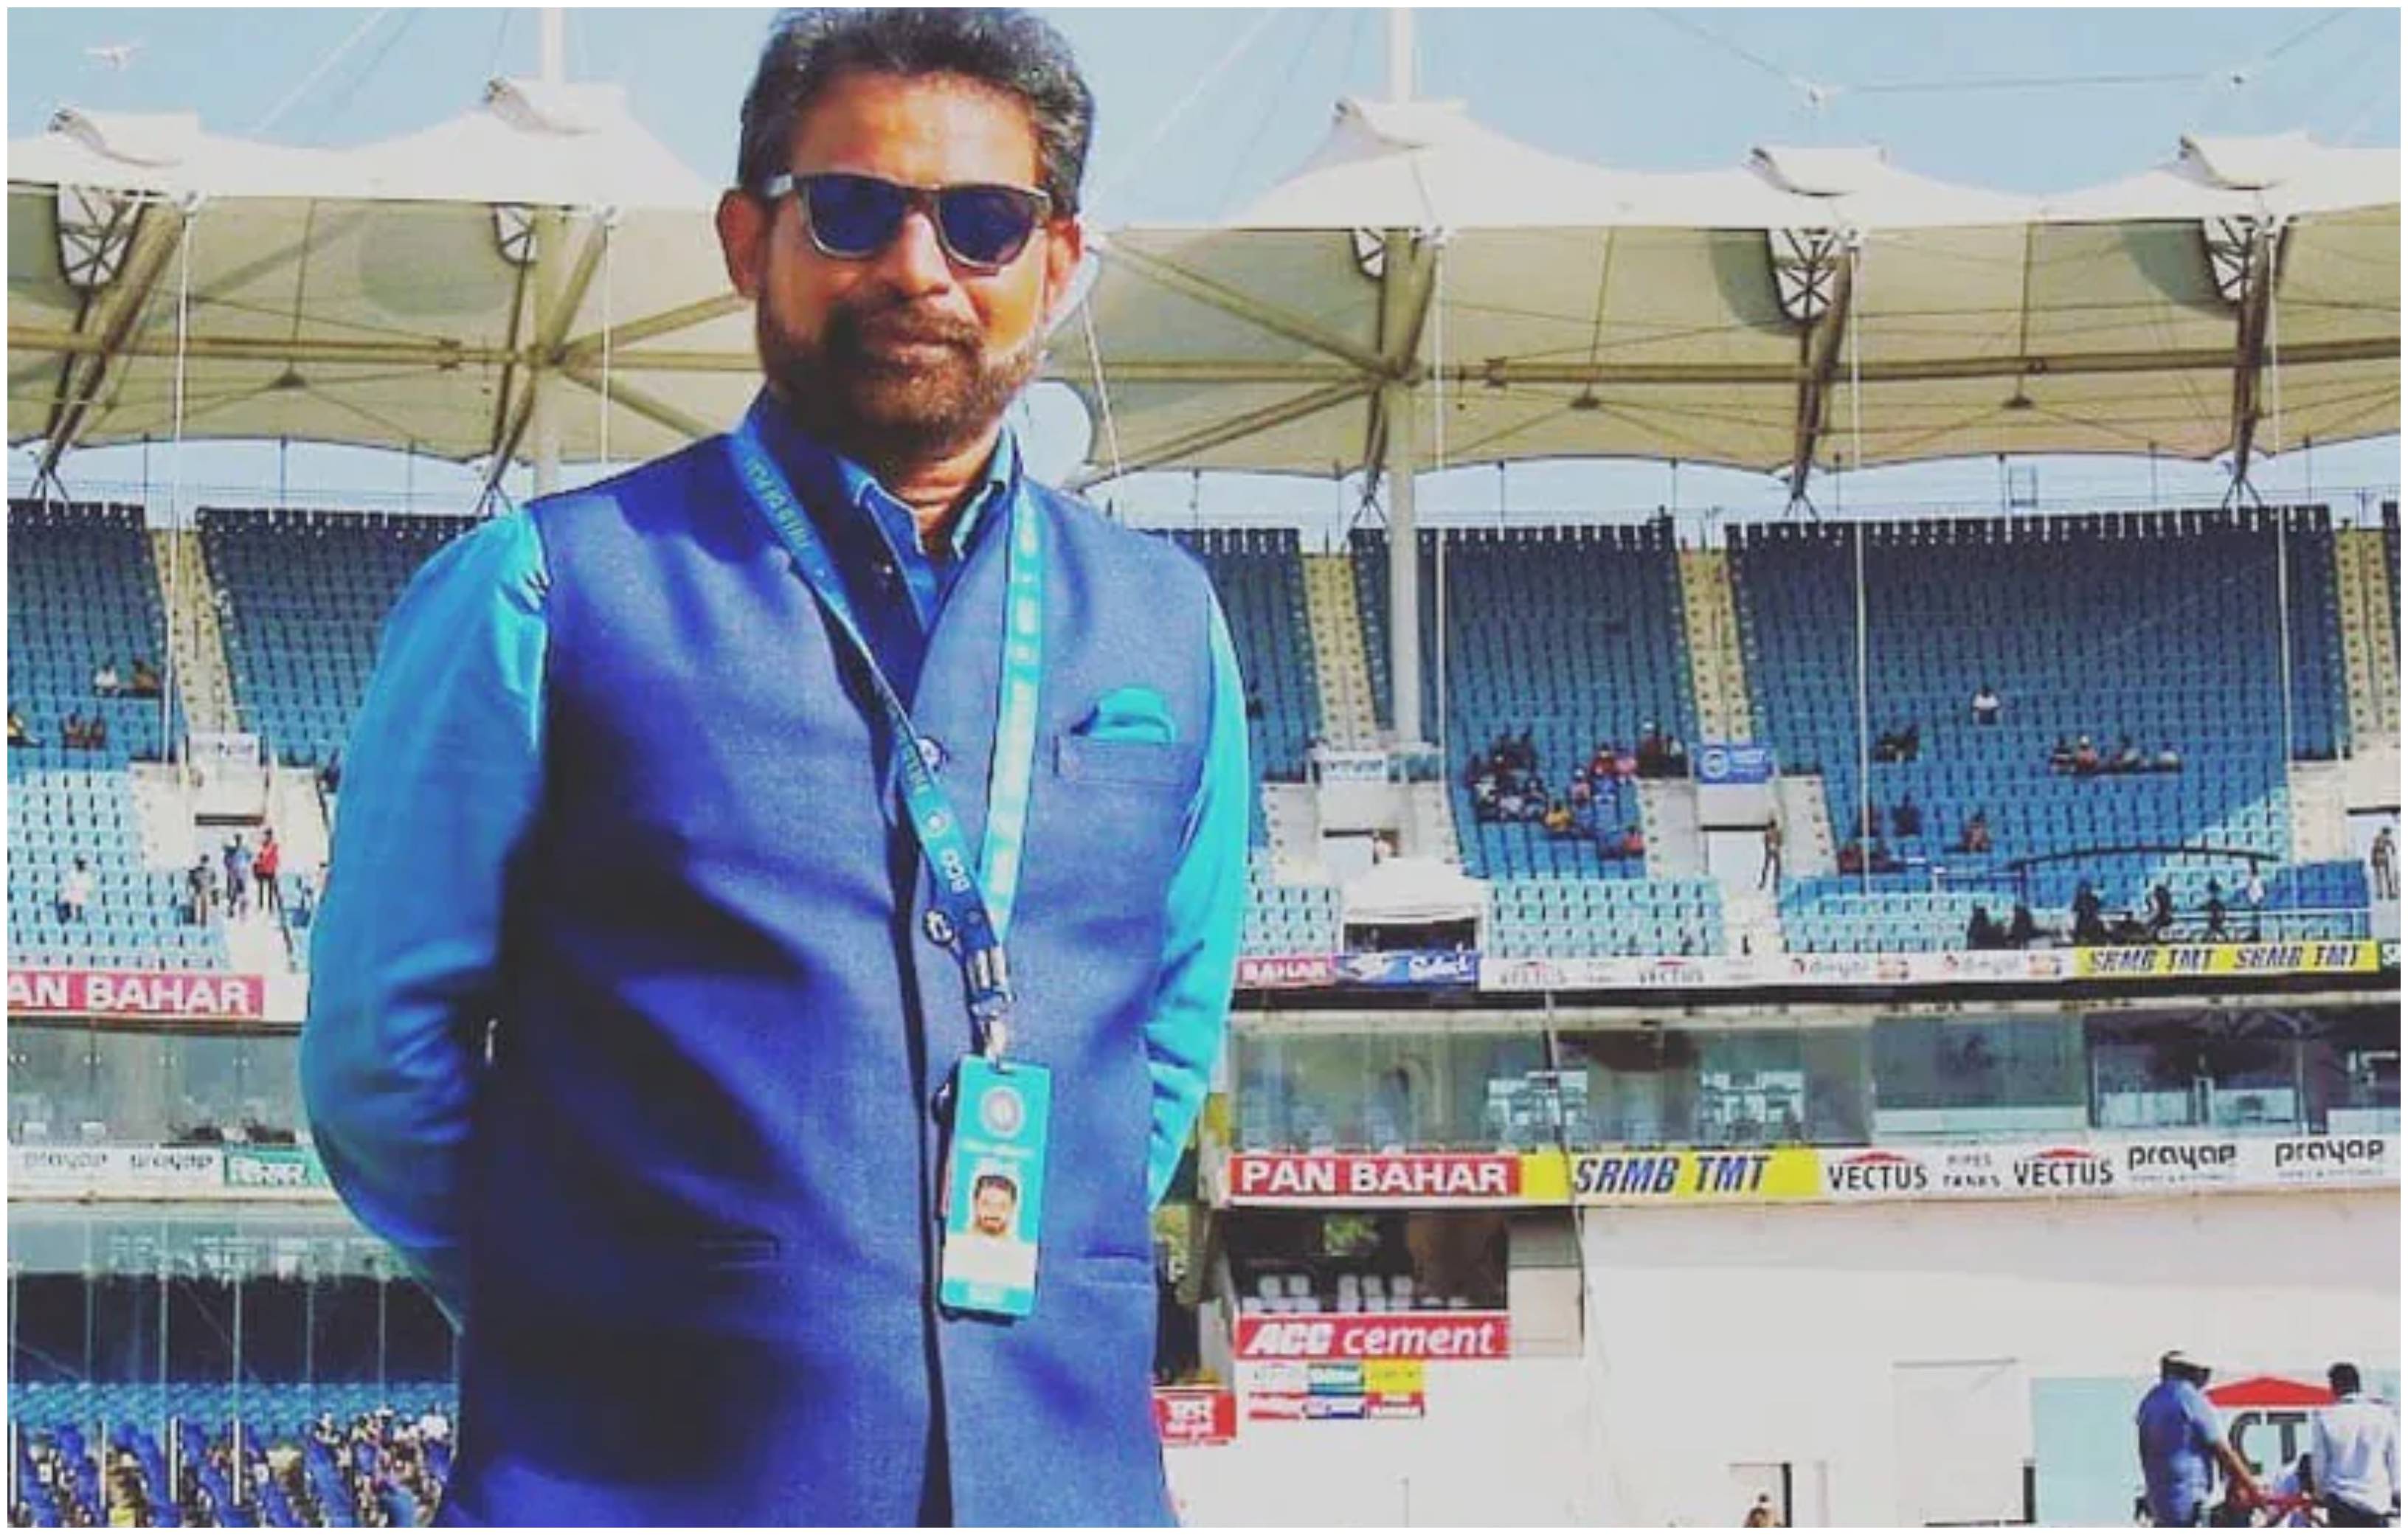 BCCI Selection Committee SACKED: BCCI fires Chetan Sharma-led SELECTION panel, invites fresh applications for position of national SELECTORS 